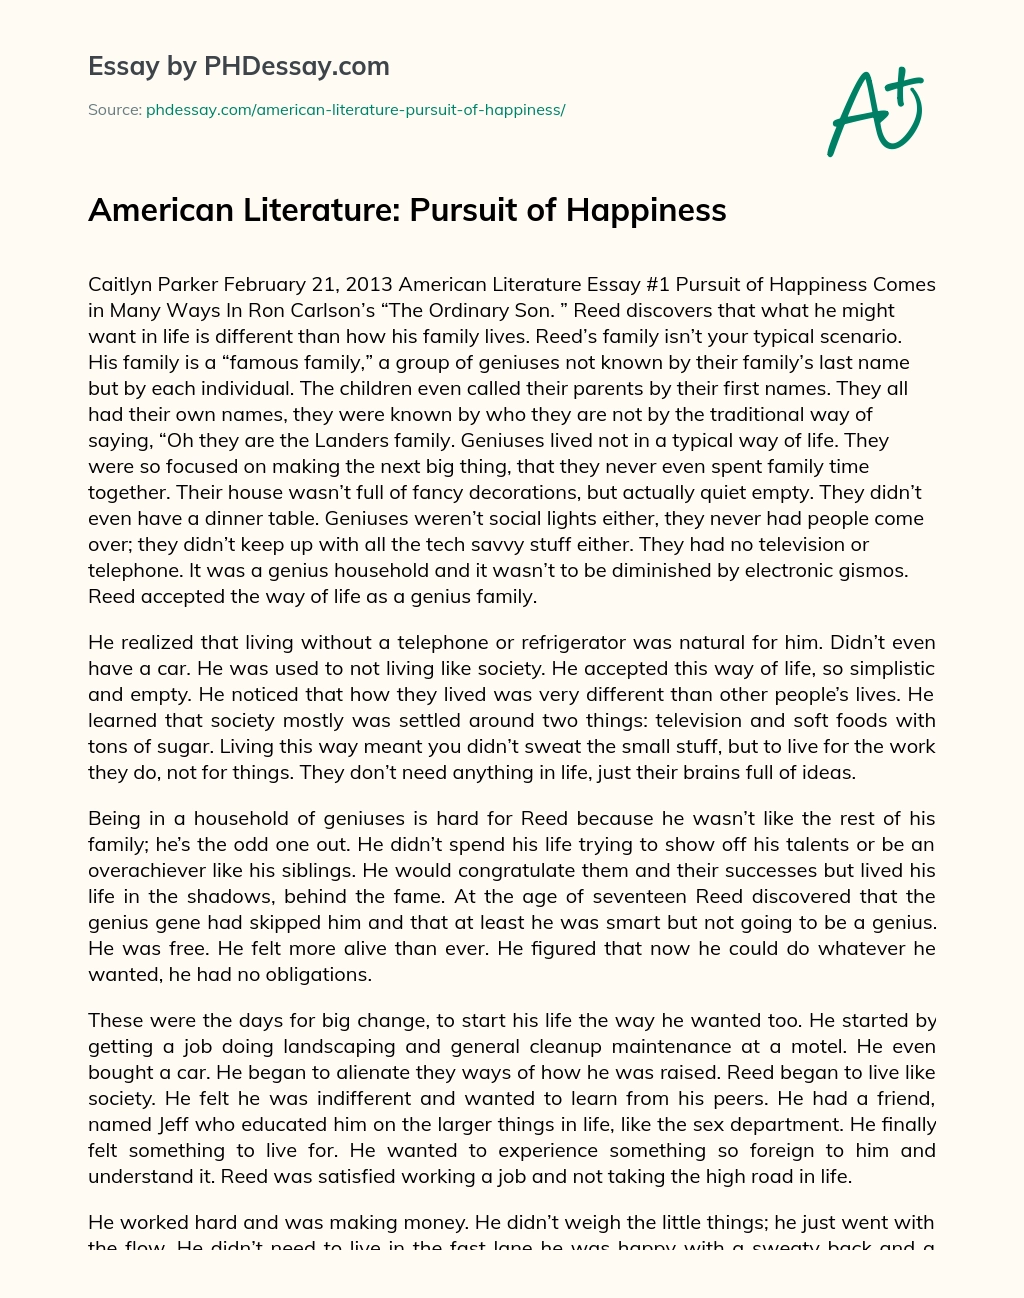 American Literature: Pursuit of Happiness essay